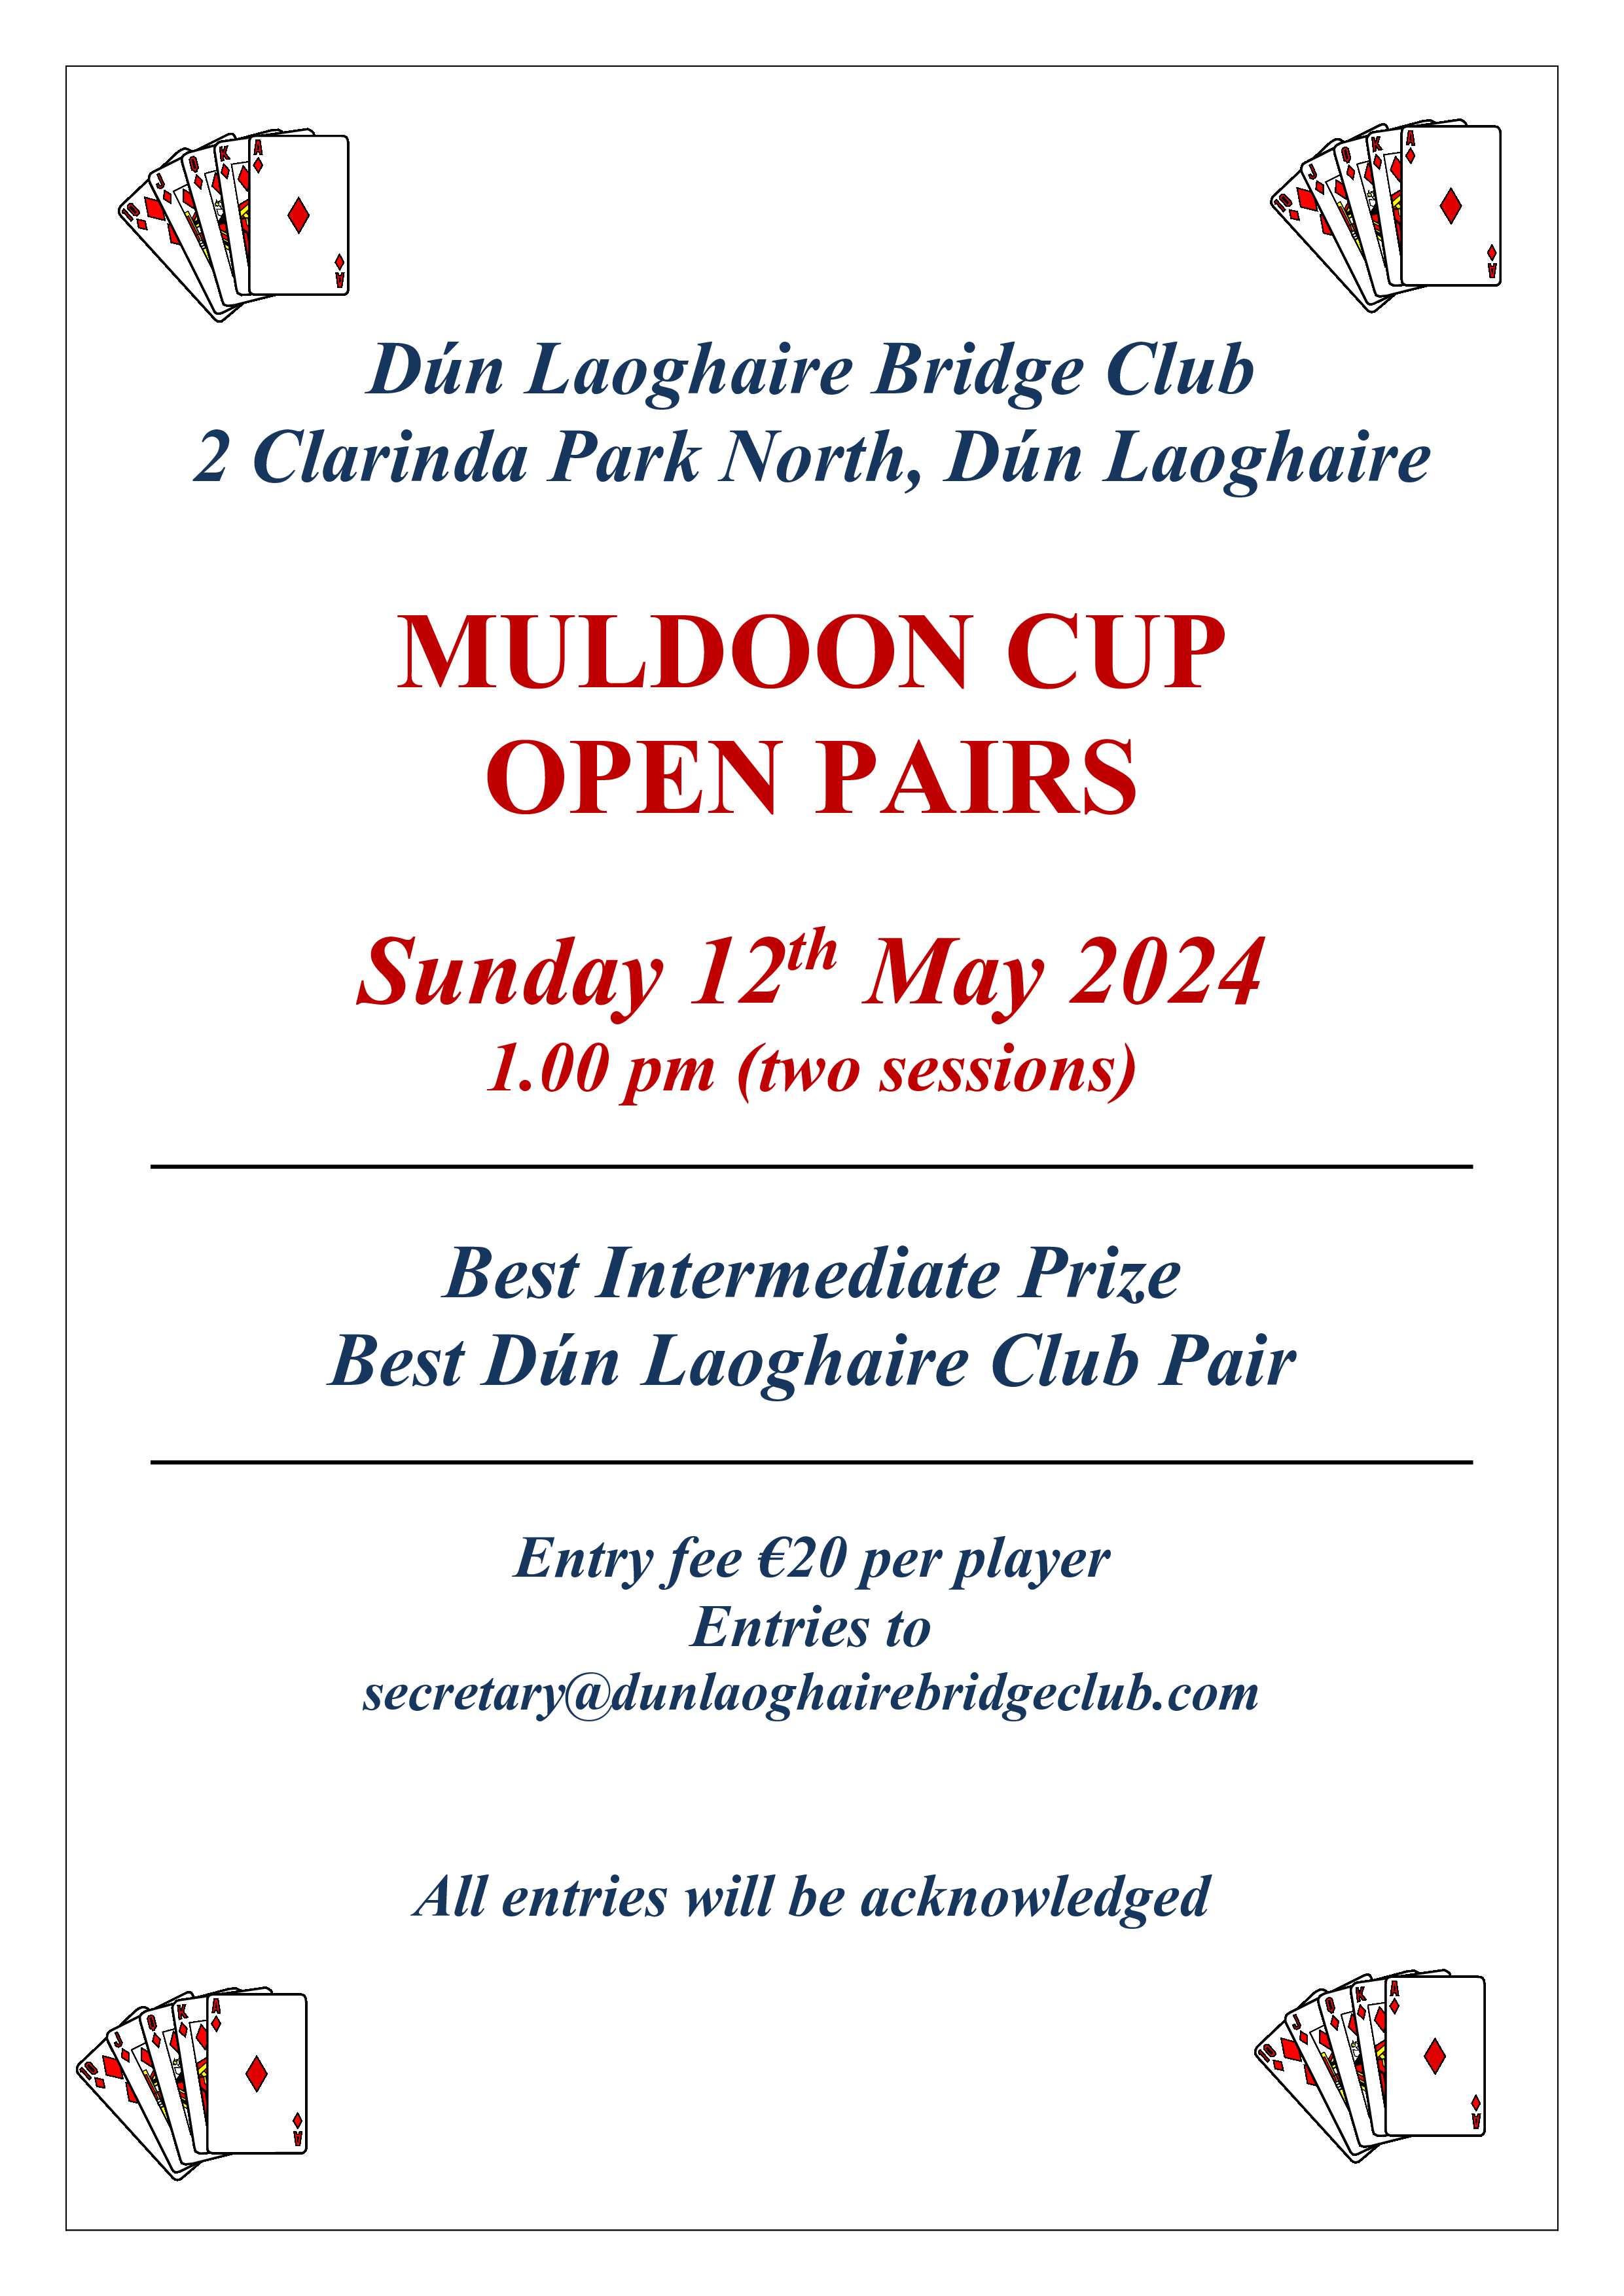 Muldoon Cup - Sunday 12 May